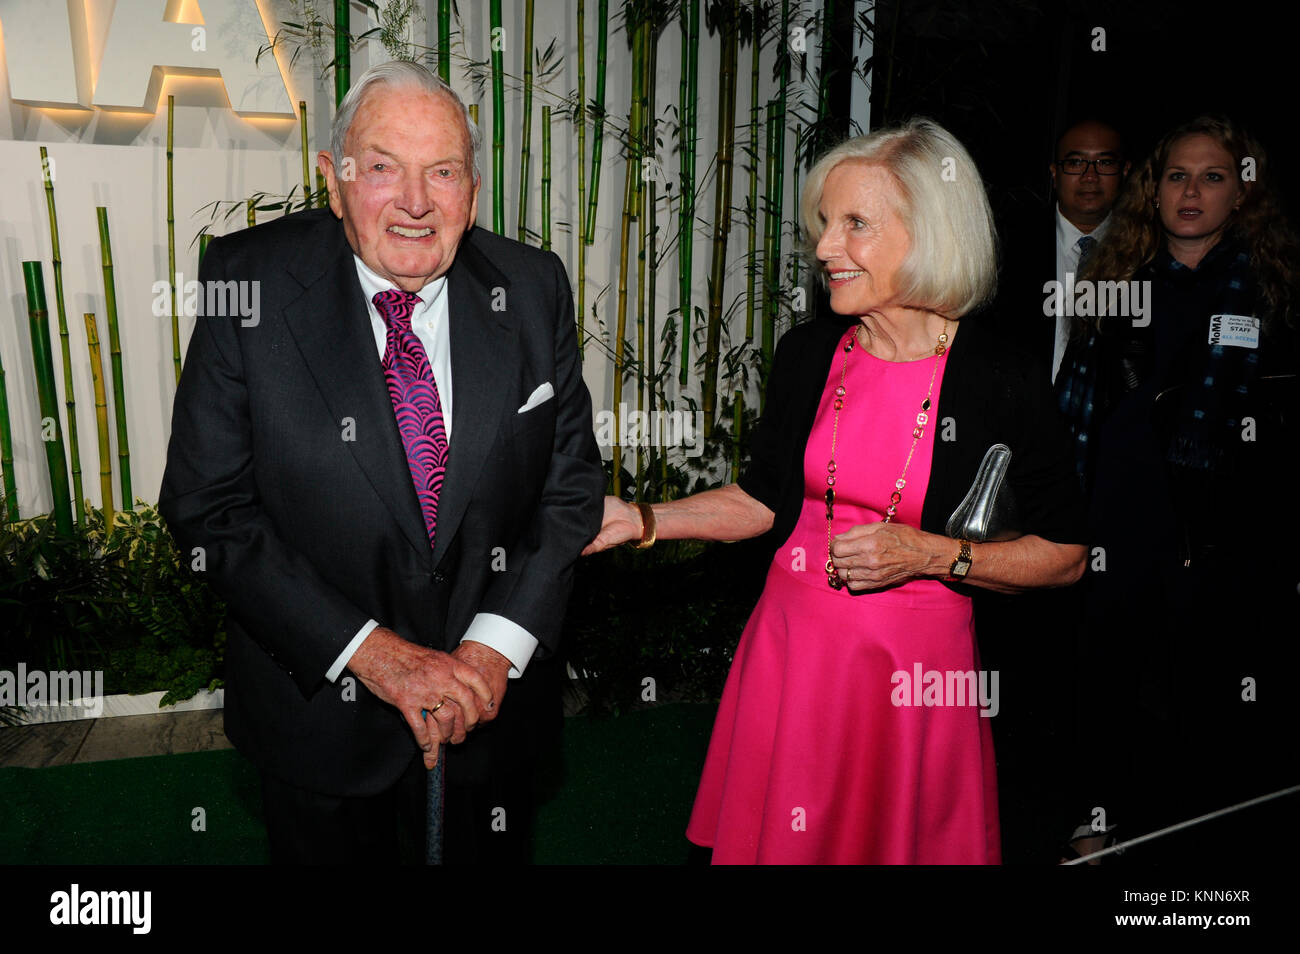 NEW YORK, NY - JUNE 02: David Rockefeller attends the 2015 Museum of Modern Art Party In The Garden and special salute to David Rockefeller on his 100th Birthday at Museum of Modern Art on June 2, 2015 in New York City   People:  David Rockefeller Stock Photo